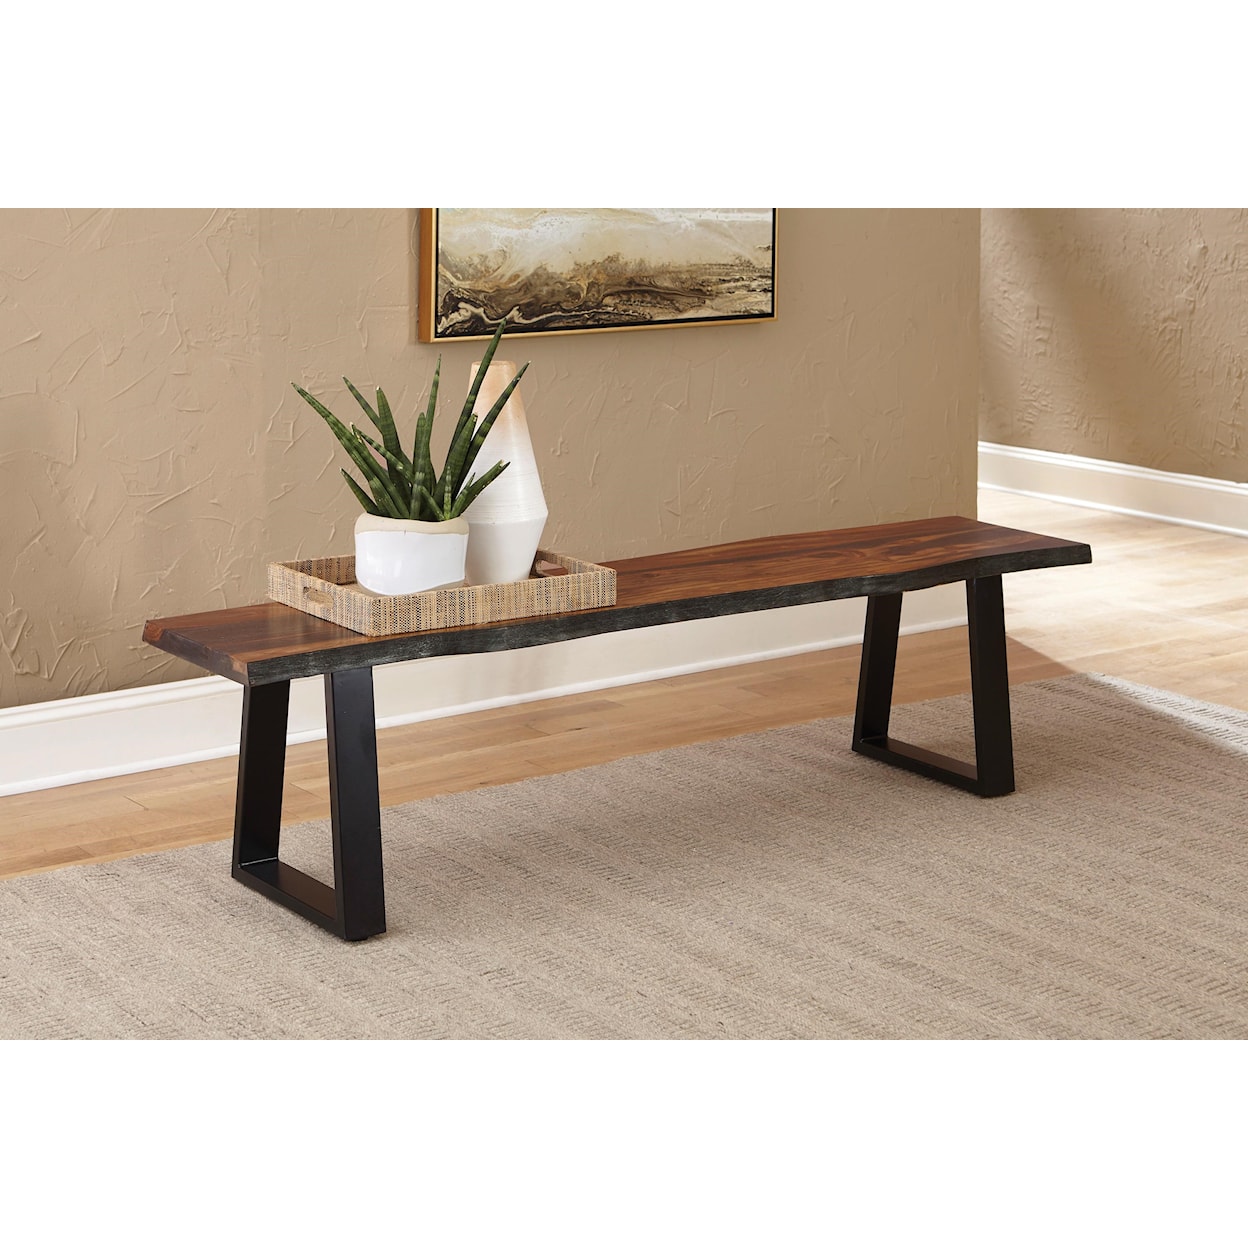 Coaster Everyday Ditman Rustic Bench